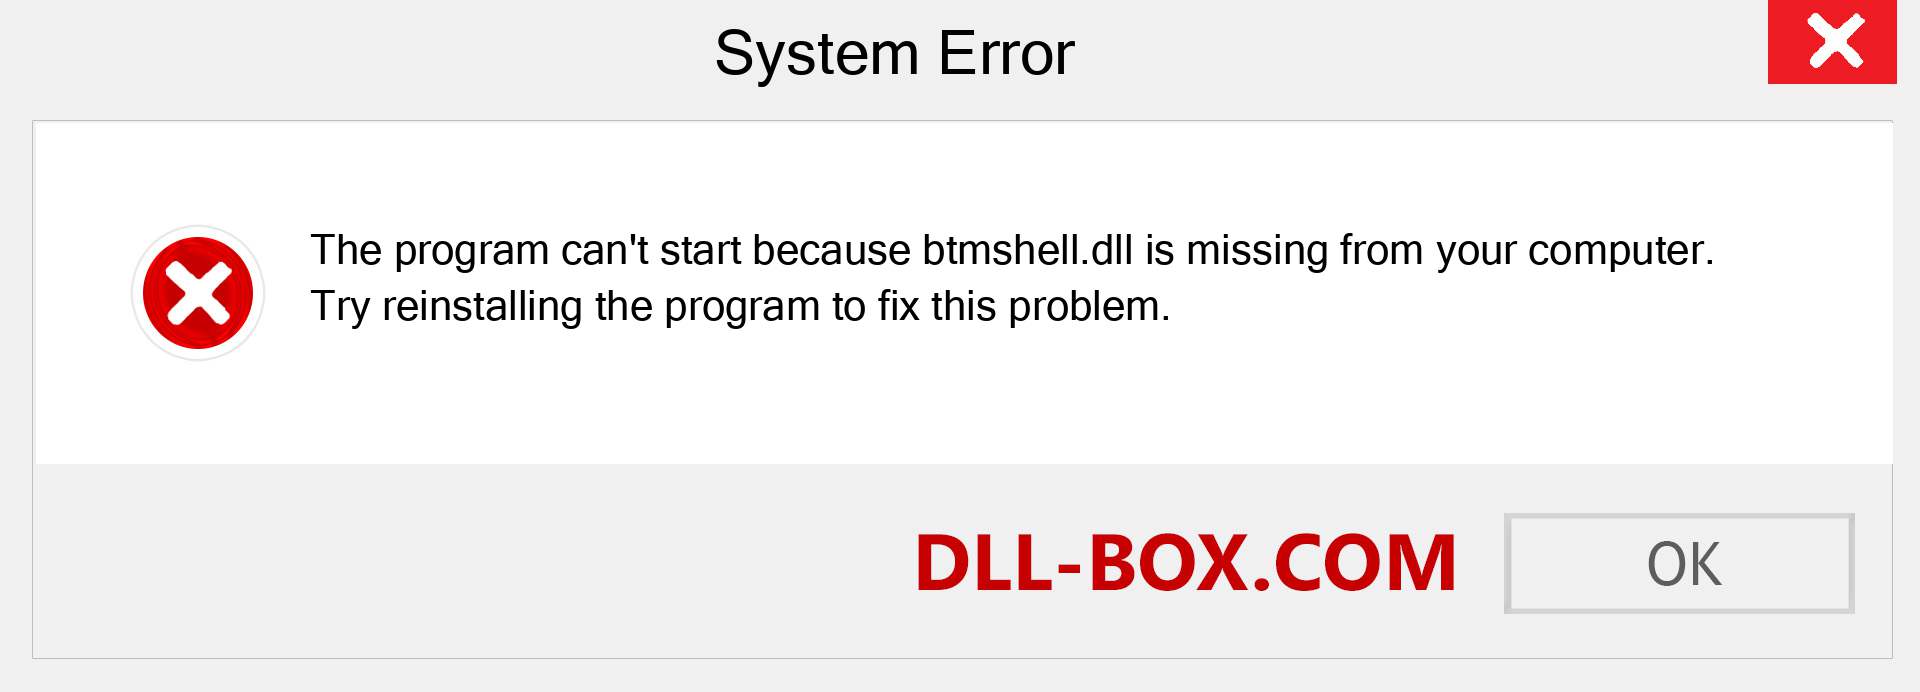  btmshell.dll file is missing?. Download for Windows 7, 8, 10 - Fix  btmshell dll Missing Error on Windows, photos, images